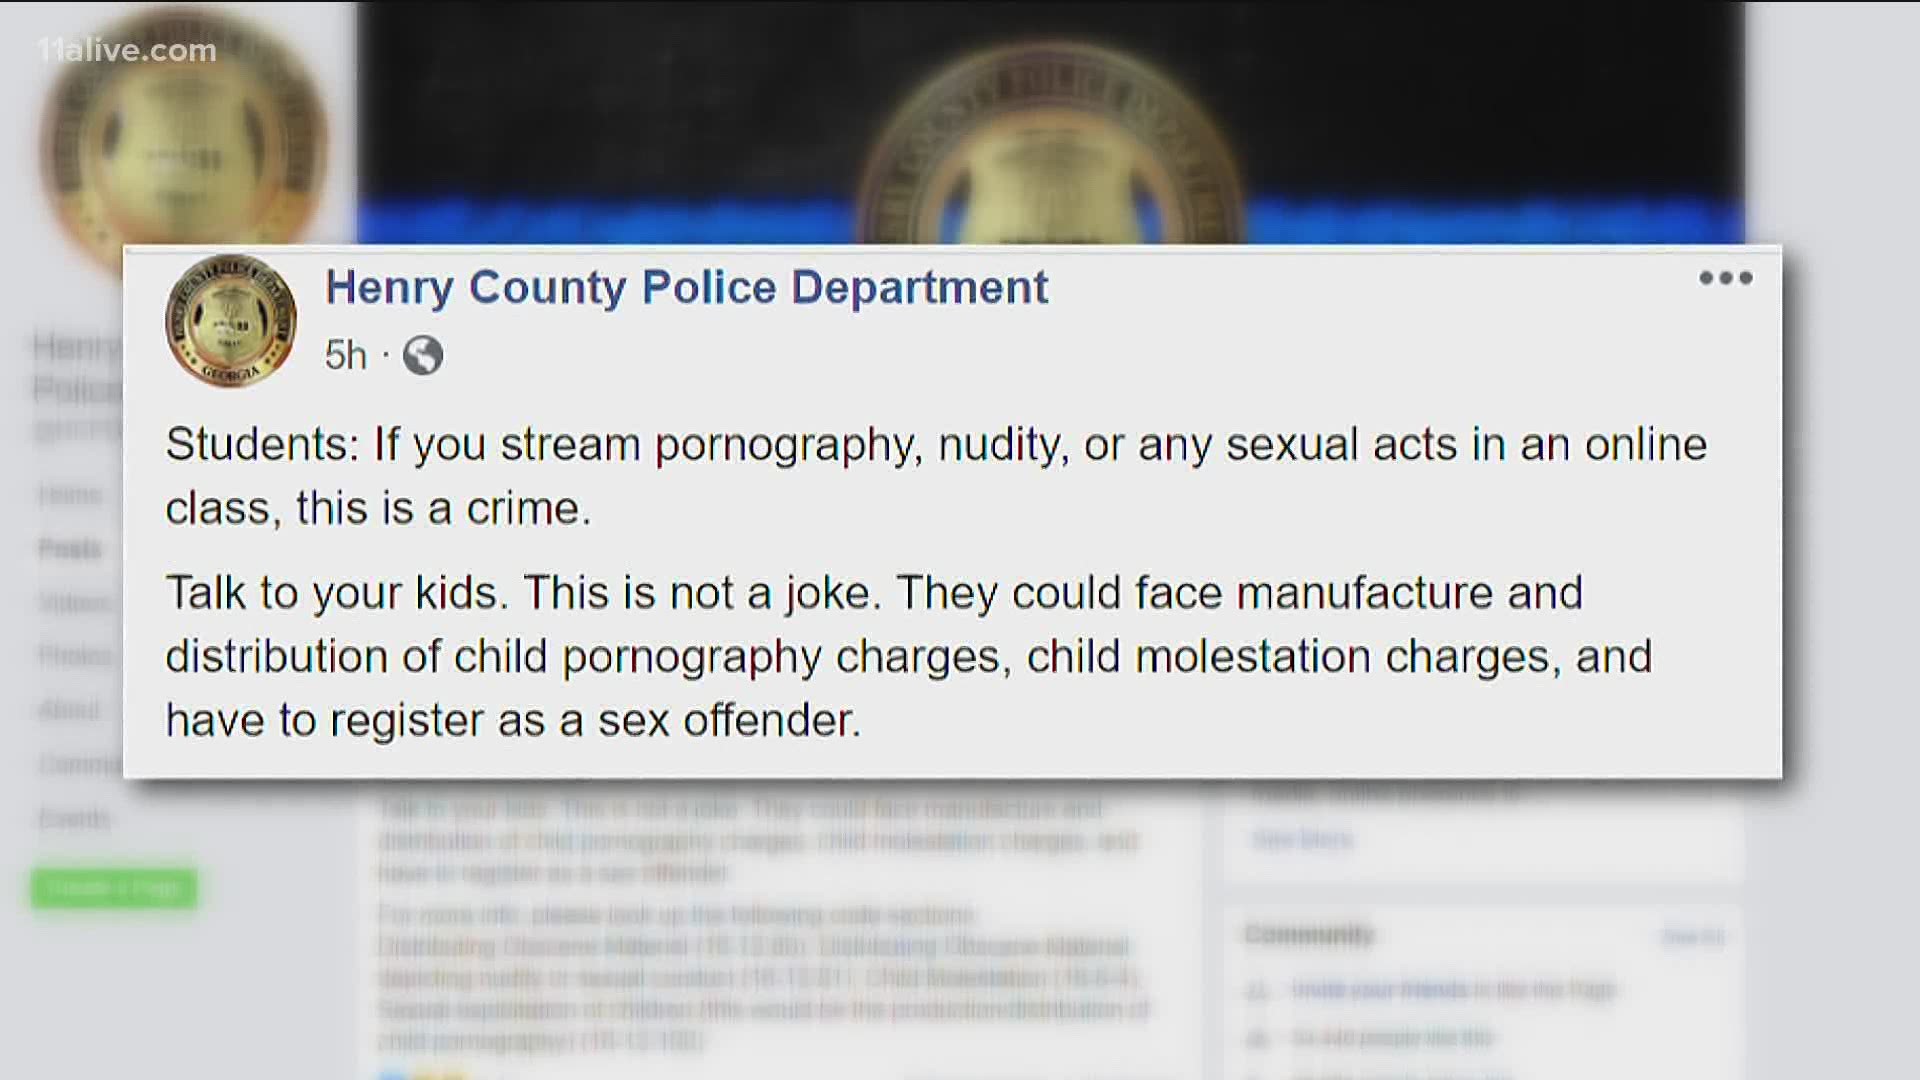 Porn in online classes could lead to life-altering charges for students, warns police 11alive